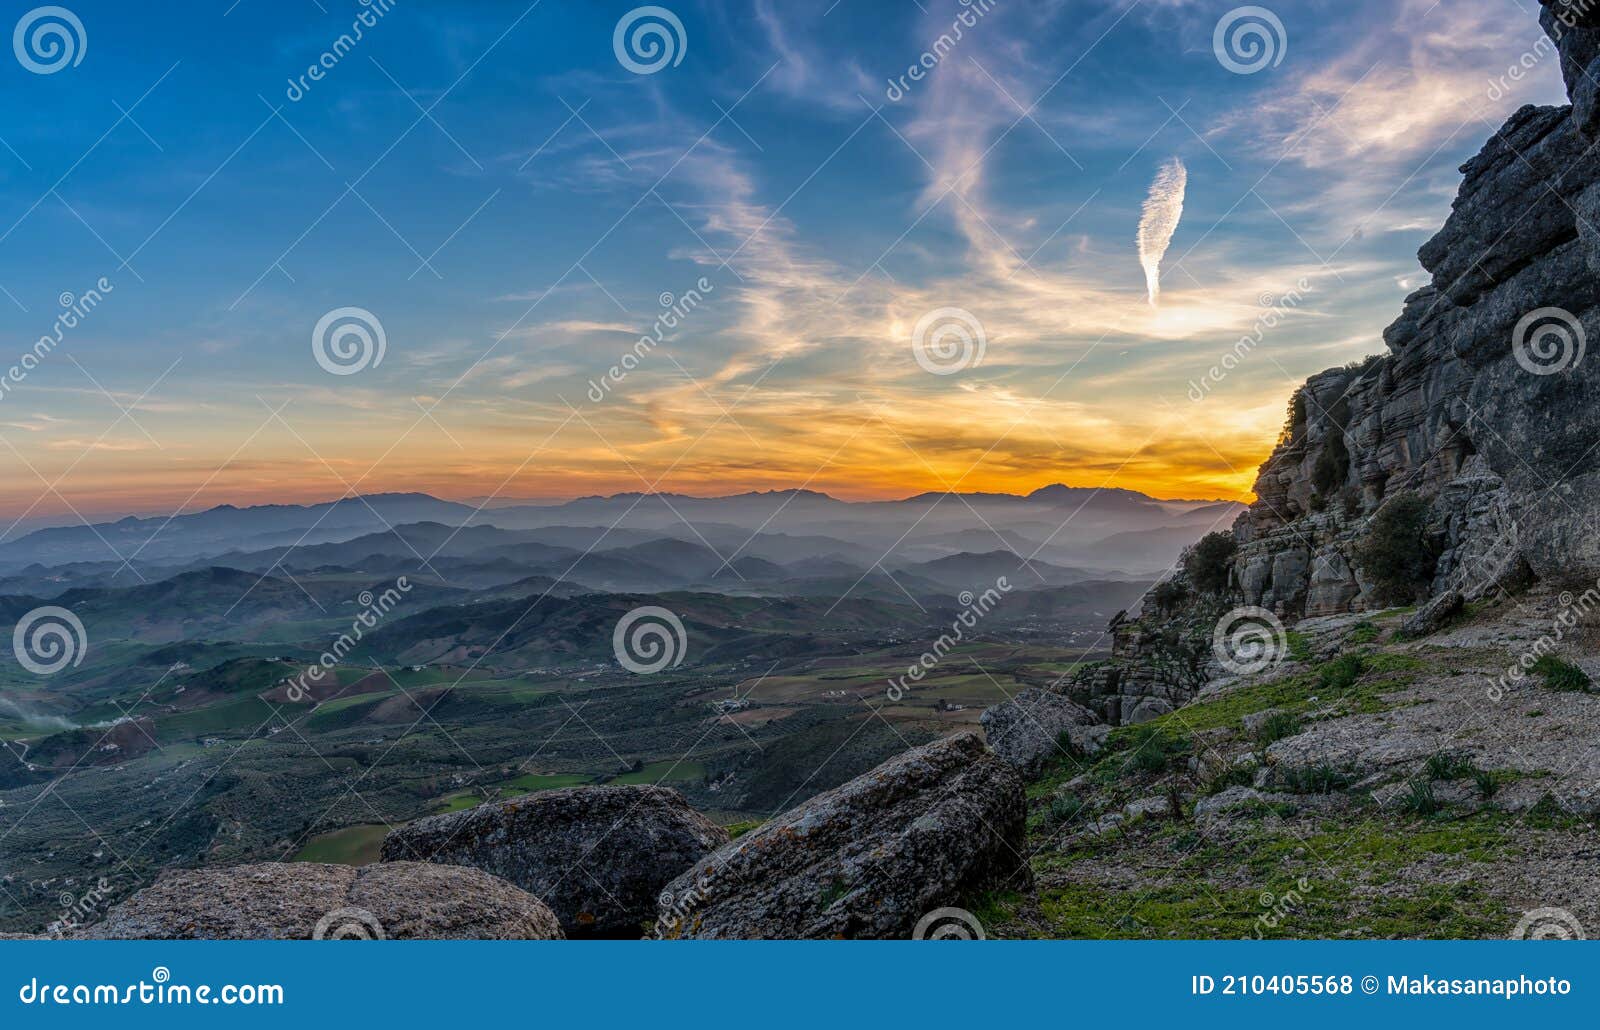 landscape view of the el torcal rock formations and the montes de malaga nature park in andalusia at sunset